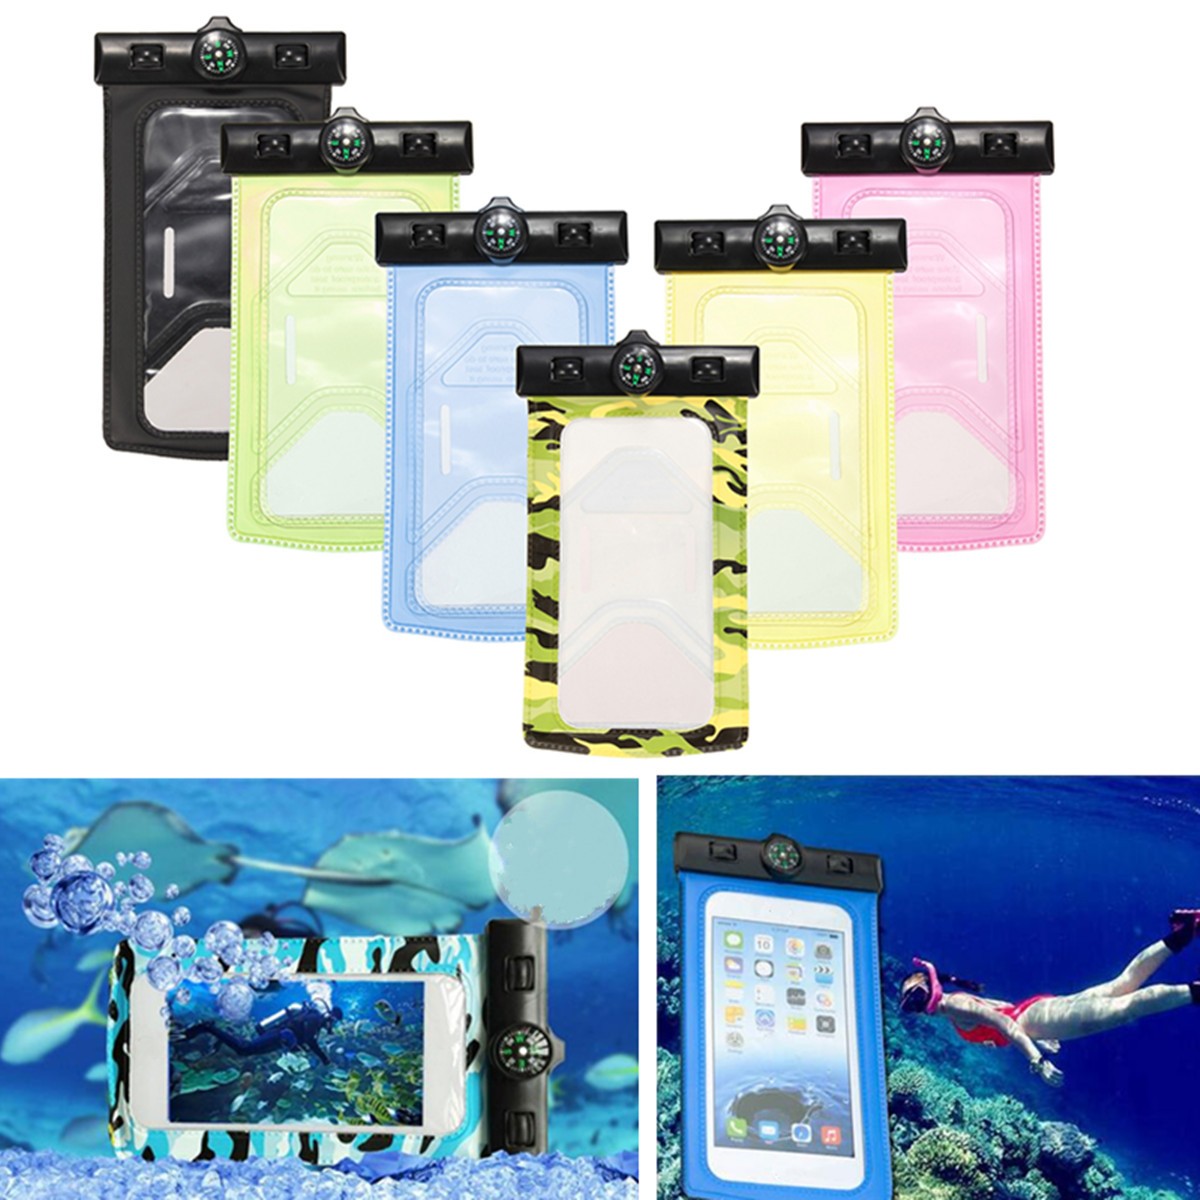 

Waterproof IPX8 Underwater Pouch Bag Case Cover + Compass For 3.5-inch To 6-inch CellPhone